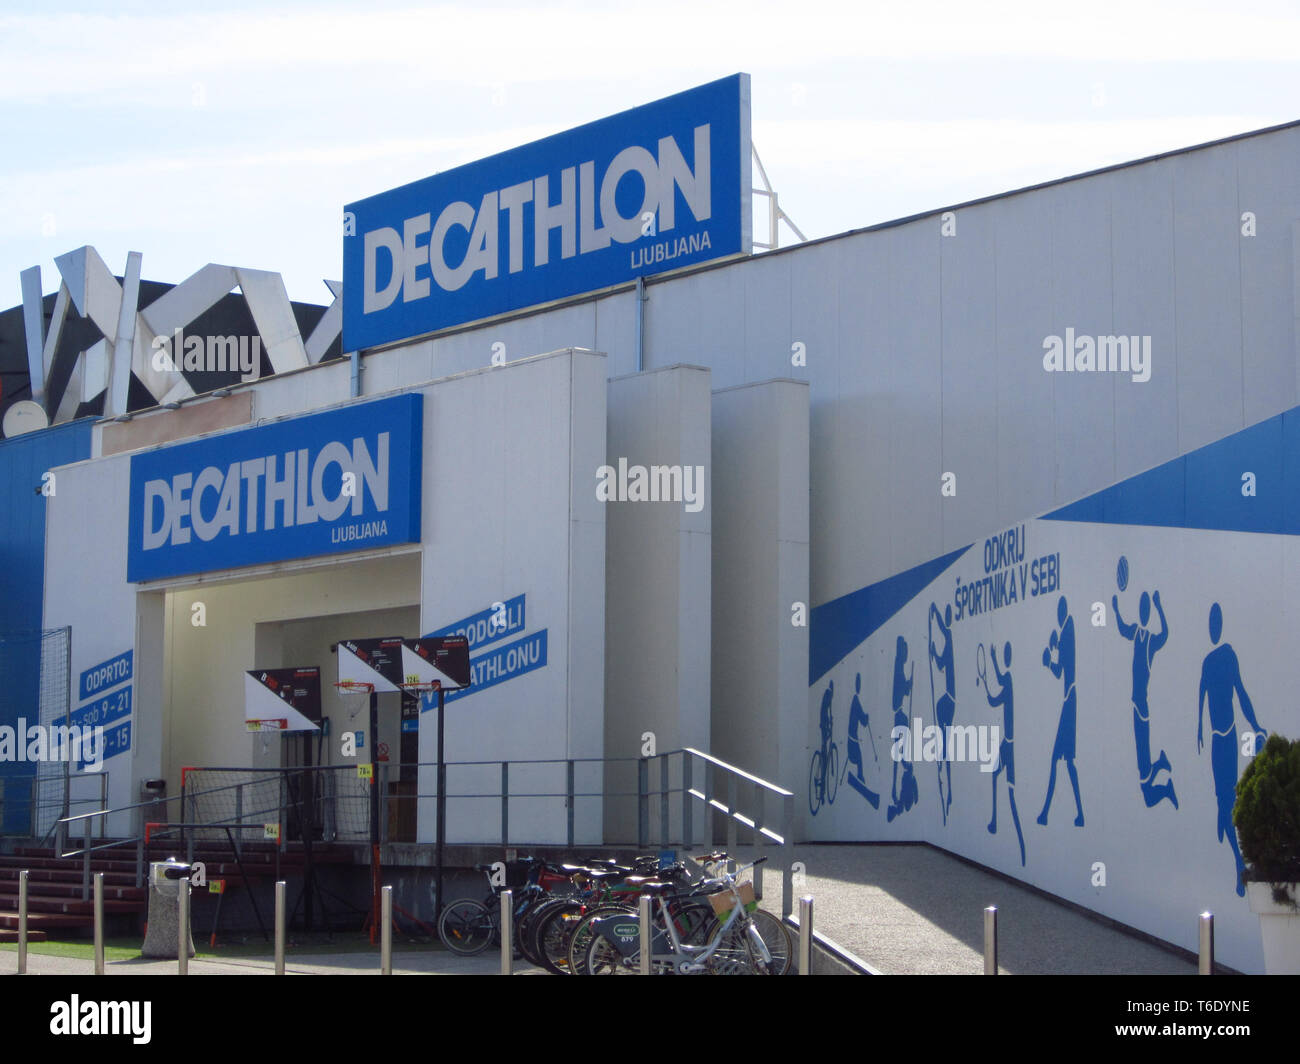 Page 2 - Decathlon Shop High Resolution Stock Photography and Images - Alamy